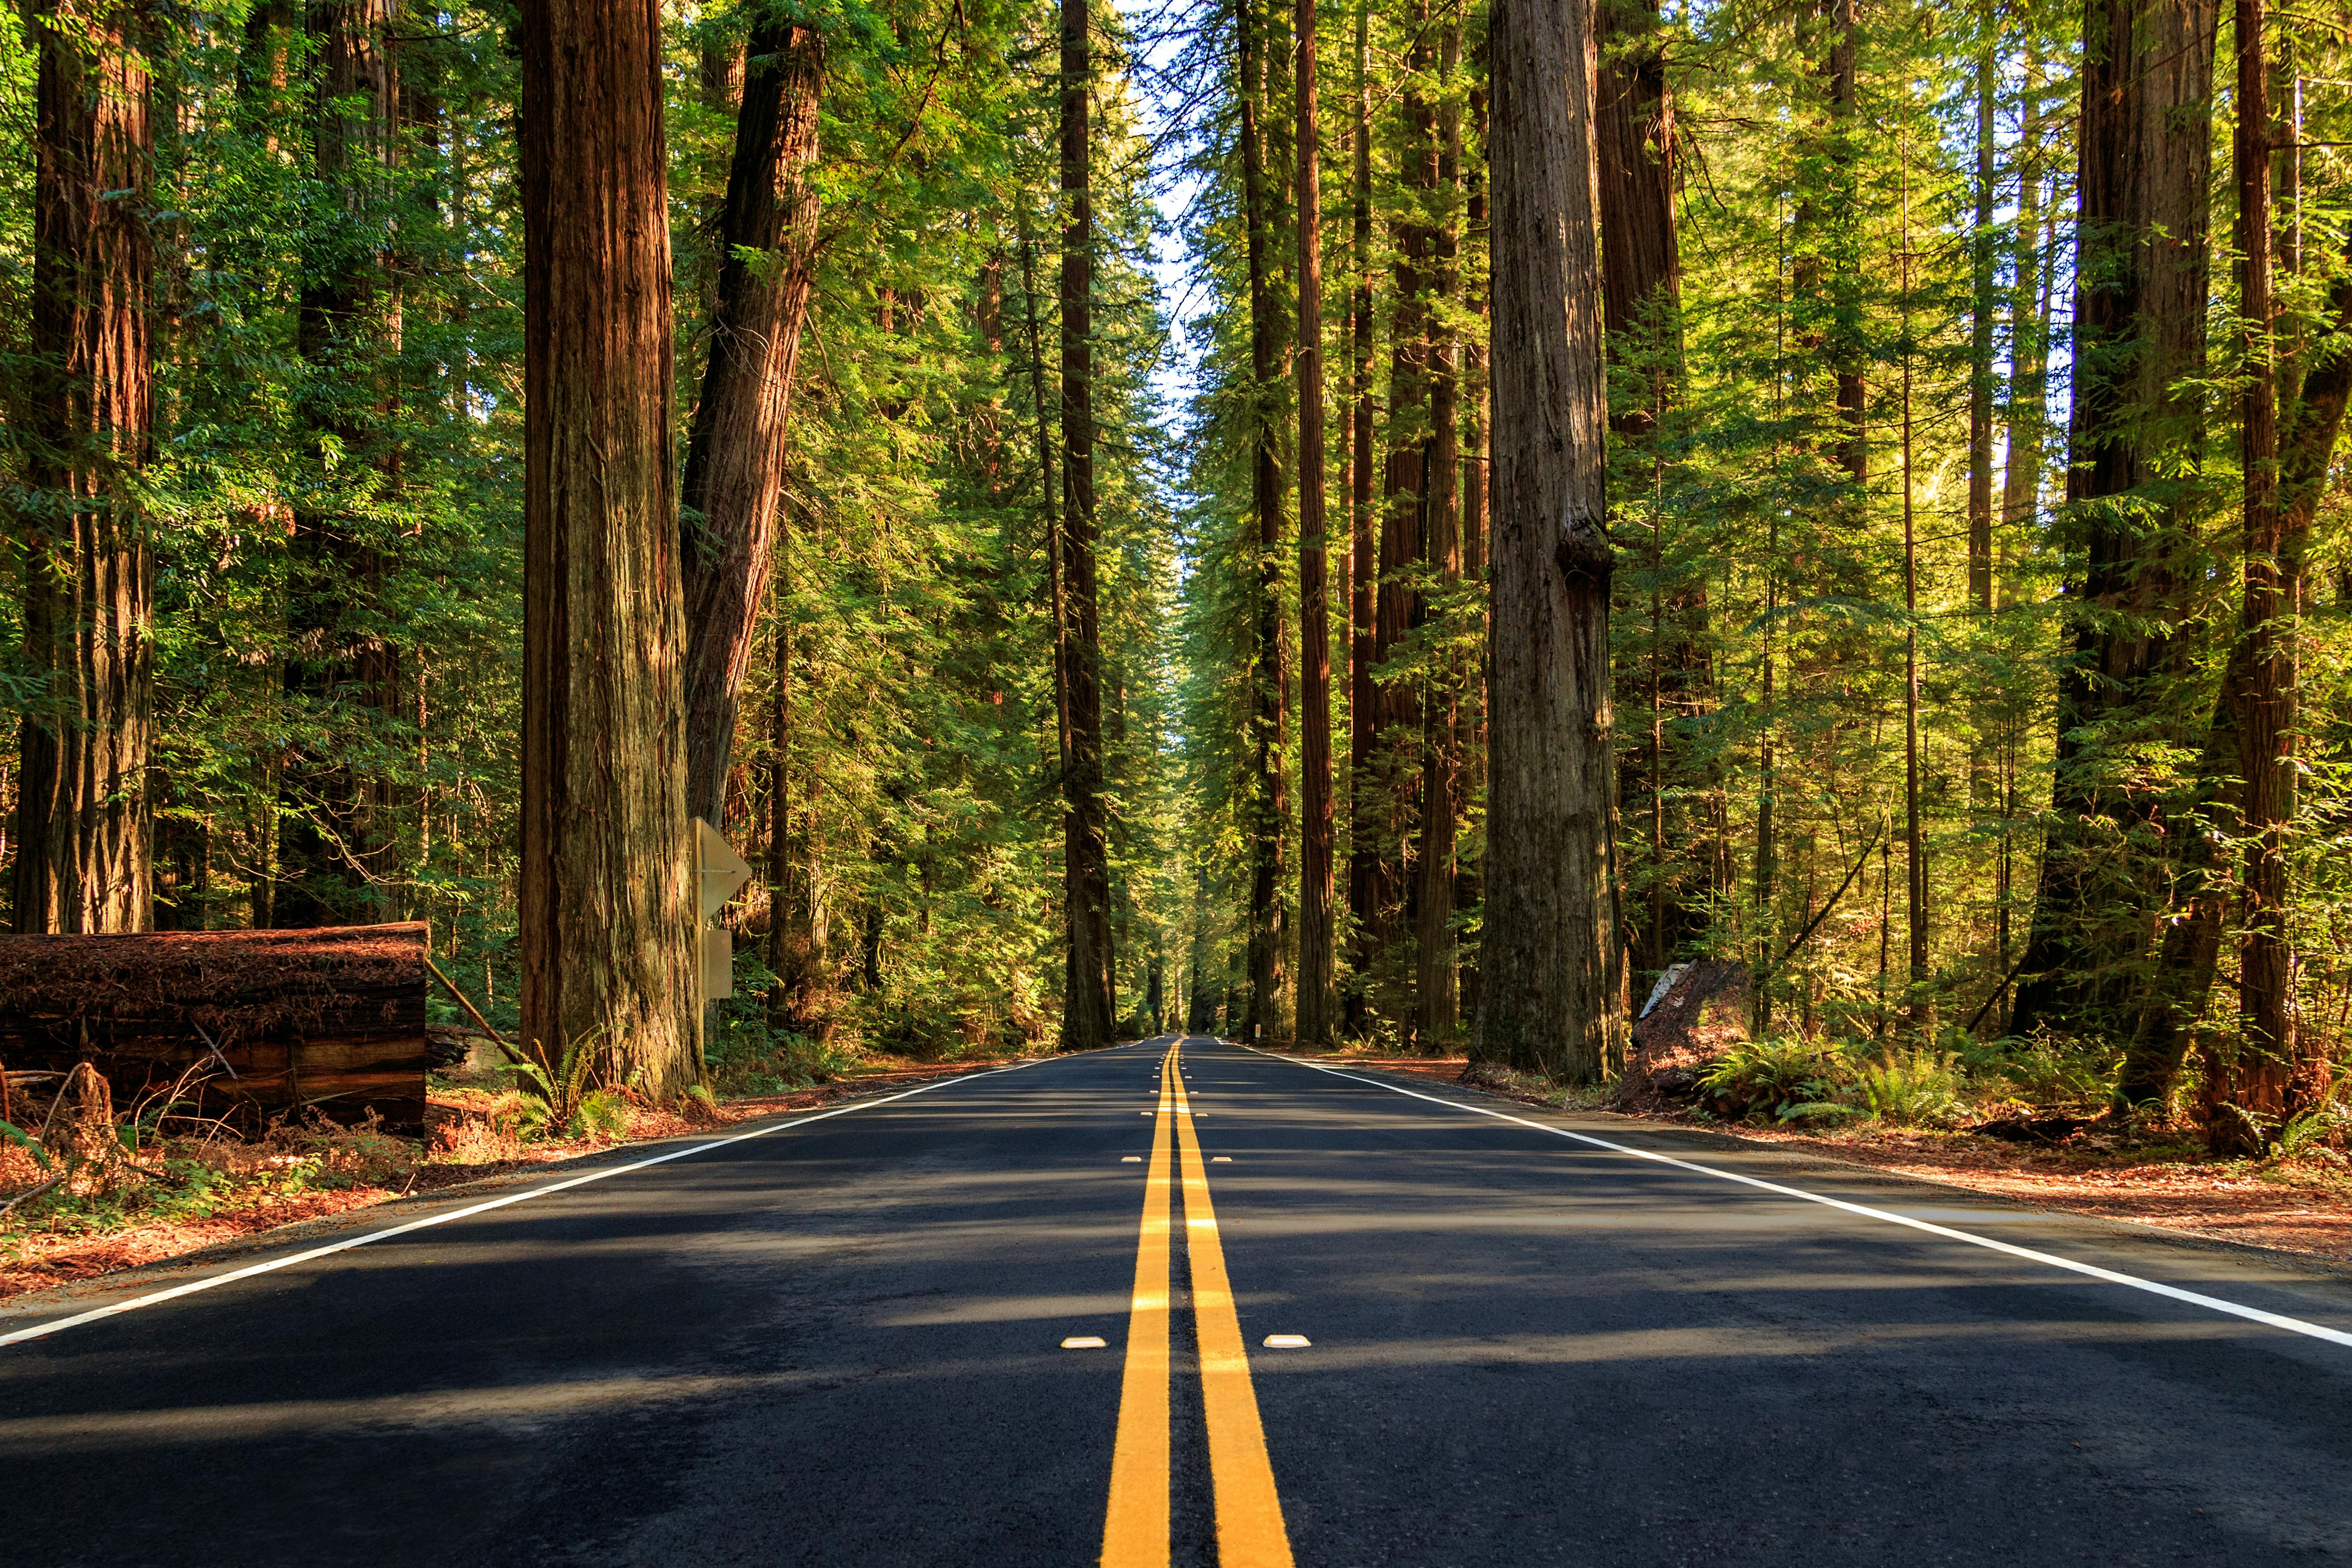 Riding through the Avenue of the Giants in California on a well maintain road on a sunny day in 